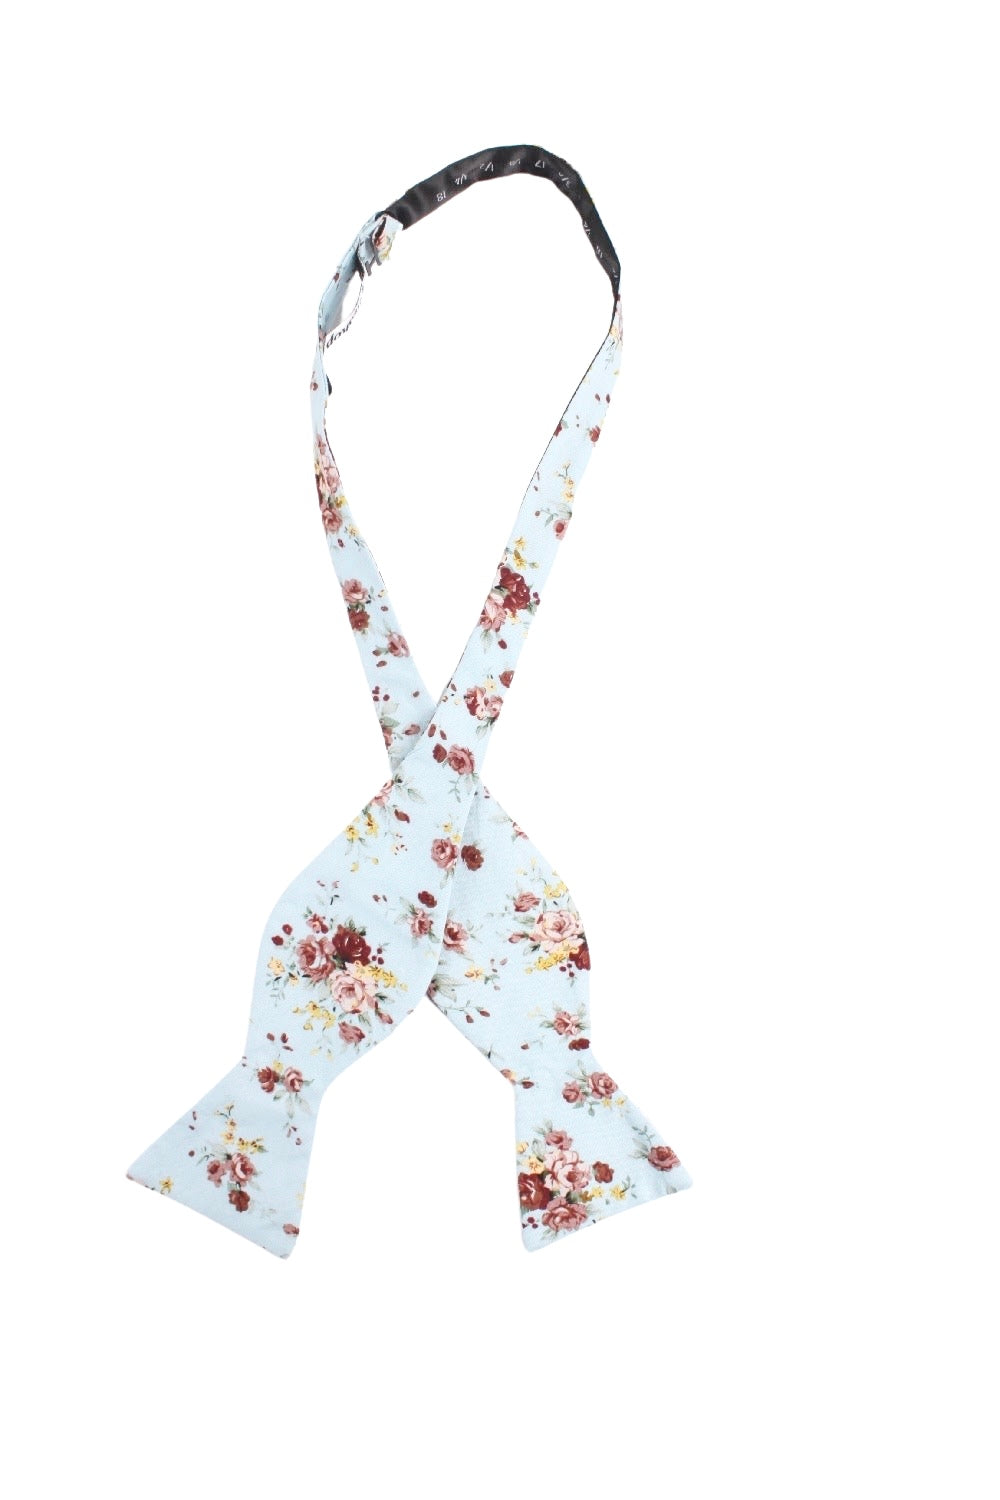 Light Blue Floral Self Tie Bow Tie SEAN-Light Blue Floral Self Tie Bow Tie 100% Cotton Flannel Handmade Adjustable to fit most neck sizes 13 3/4" - 18" Great for: Weddings Events Anniversaries Parties-Mytieshop